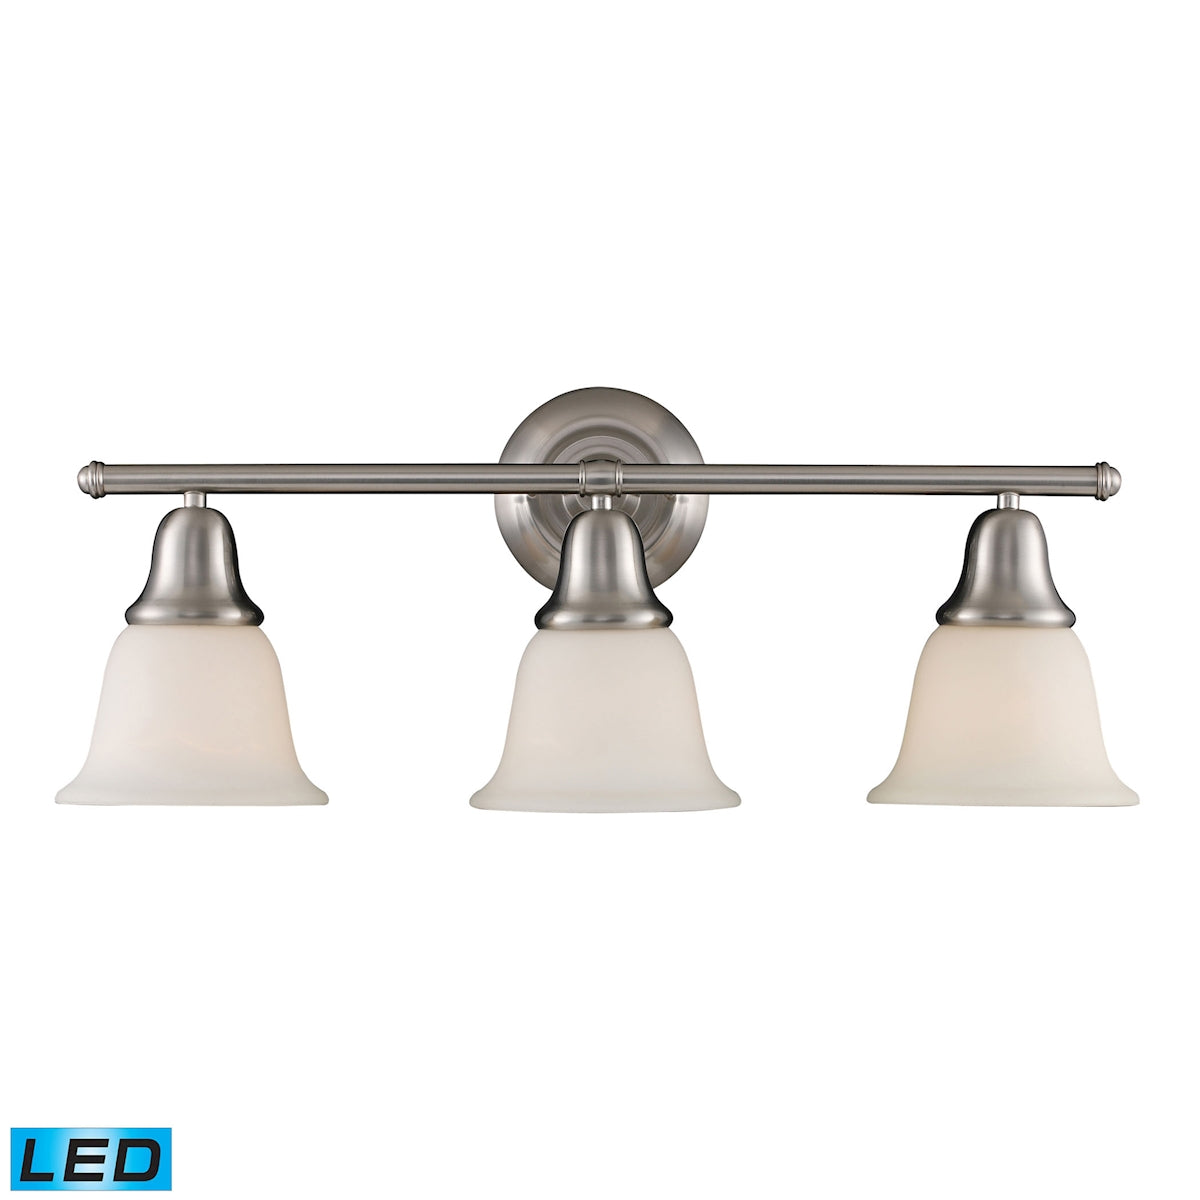 Berwick 3-Light Vanity Lamp in Brushed Nickel with White Glass - Includes LED Bulbs